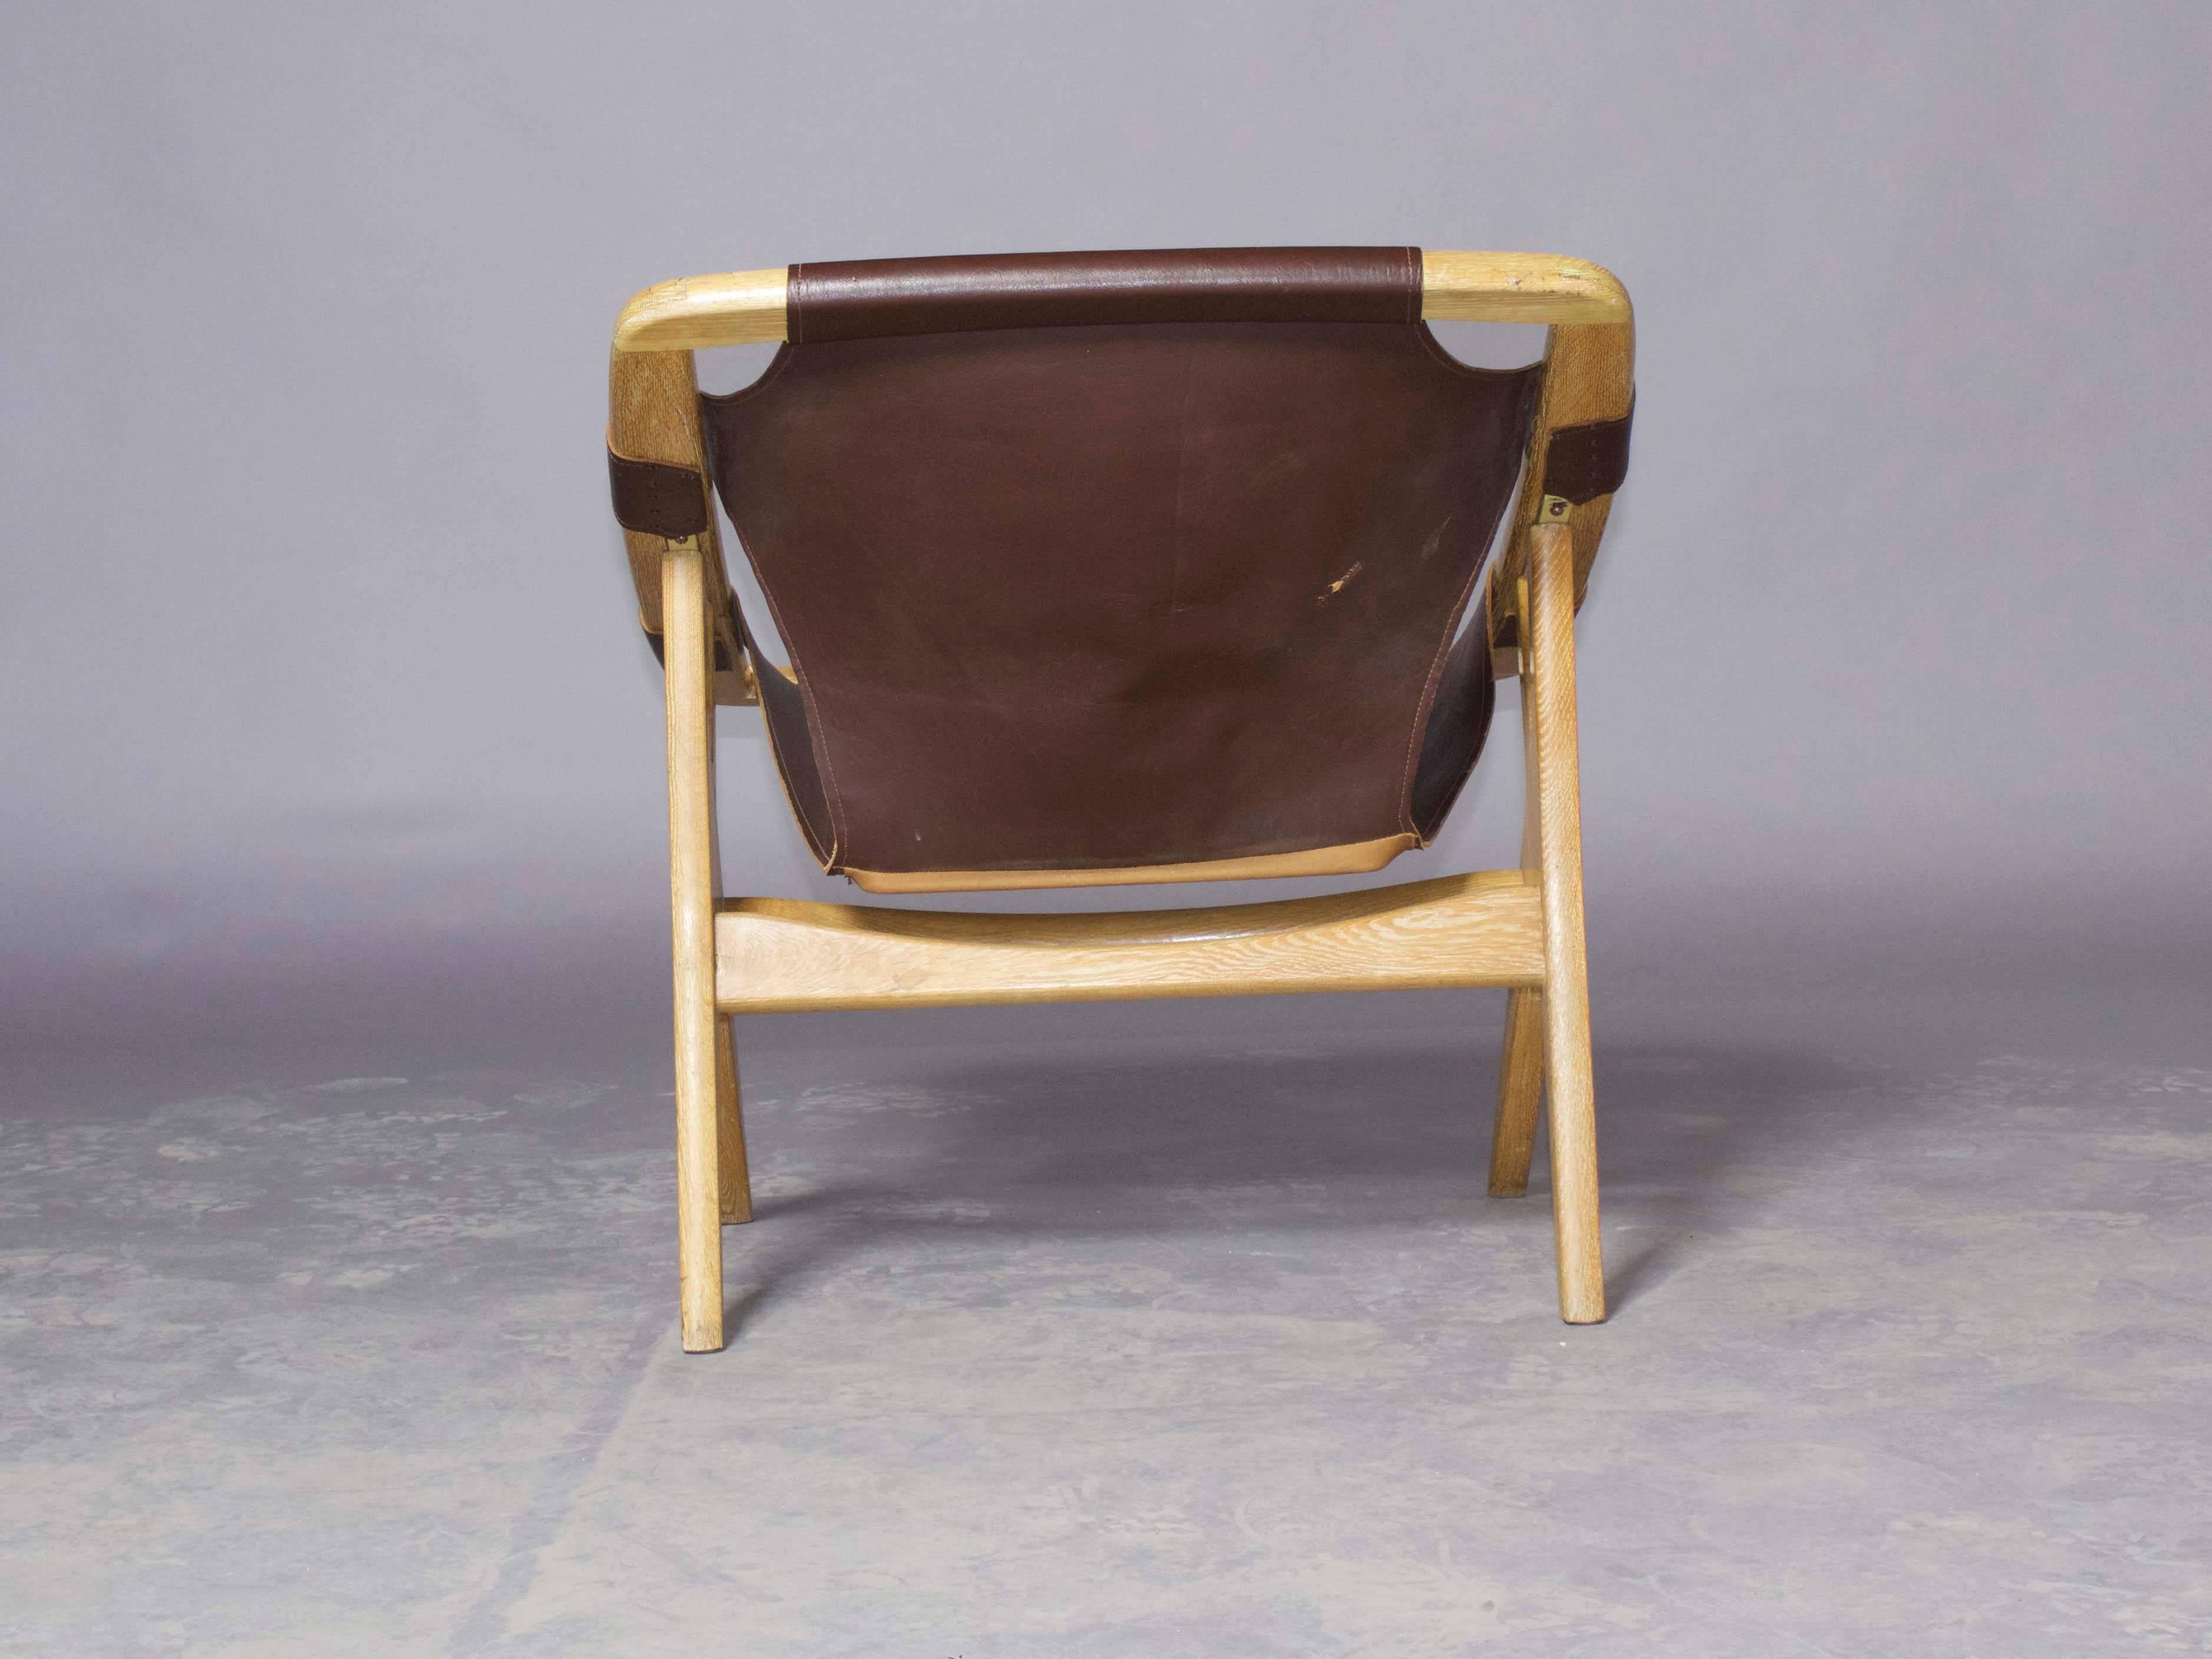 Vintage 1950s Leather Sling Chair by Arne Ruud

This Holmenkollen chair has the same name of the chair Arne Ruud designed a year later. Though is version is more rare. Excellent condition. Ready for pick up, delivery, or shipping anywhere in the